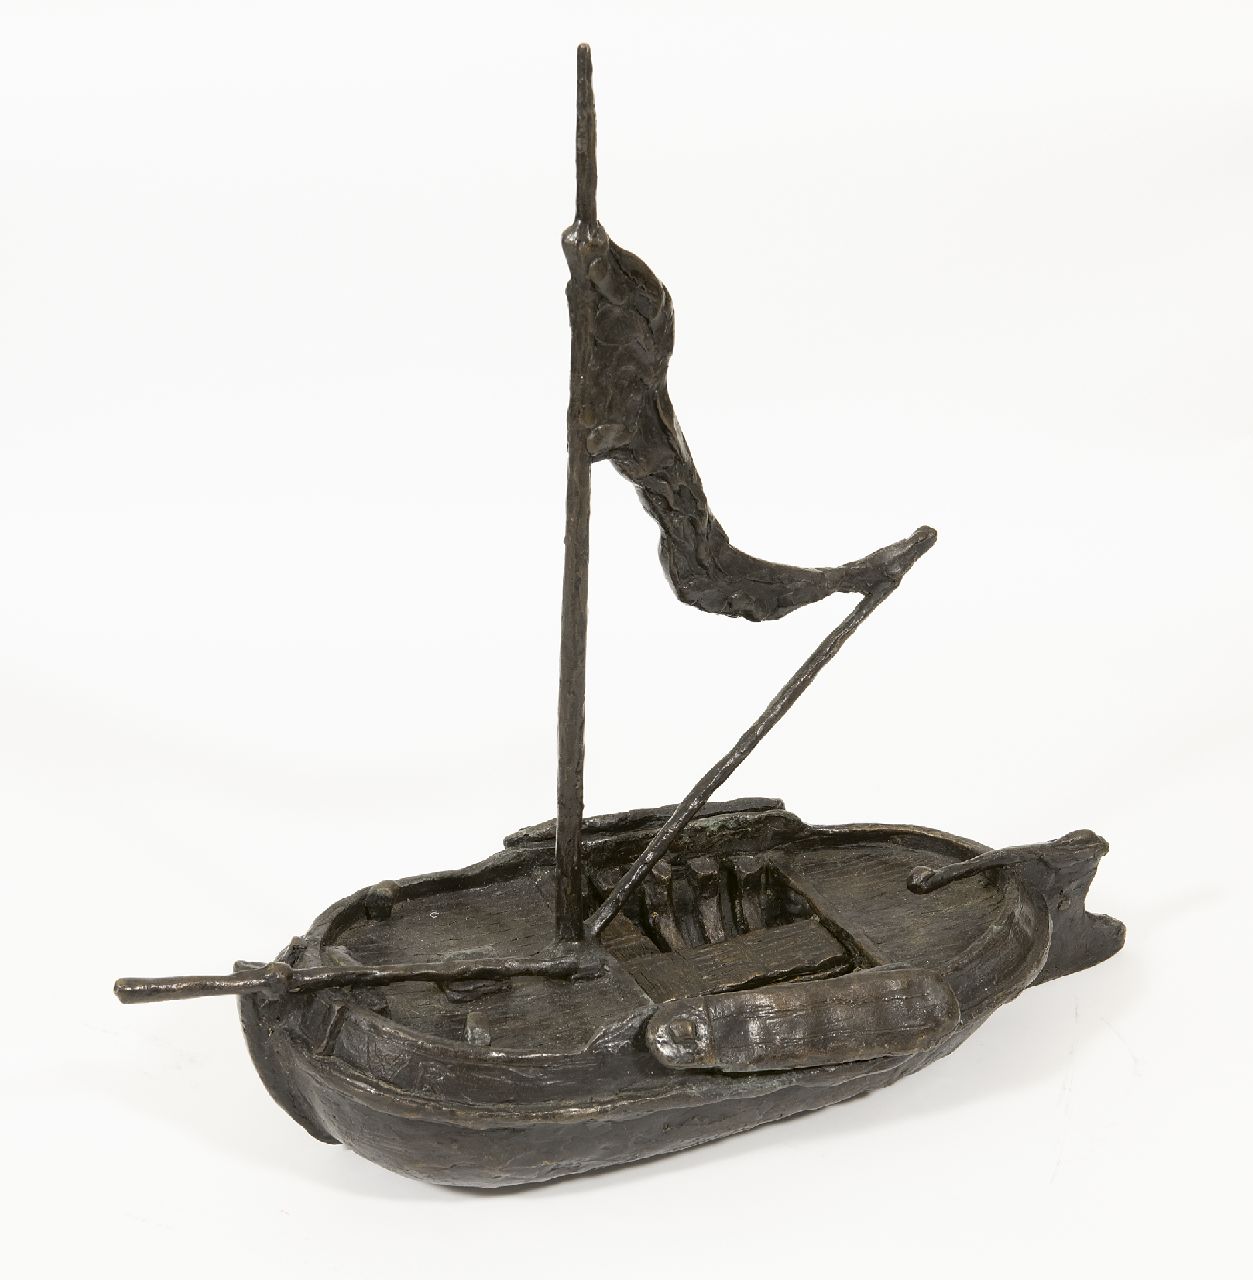 Blank H.  | Hans Blank | Sculptures and objects offered for sale | Dutch barge, bronze 31.2 cm